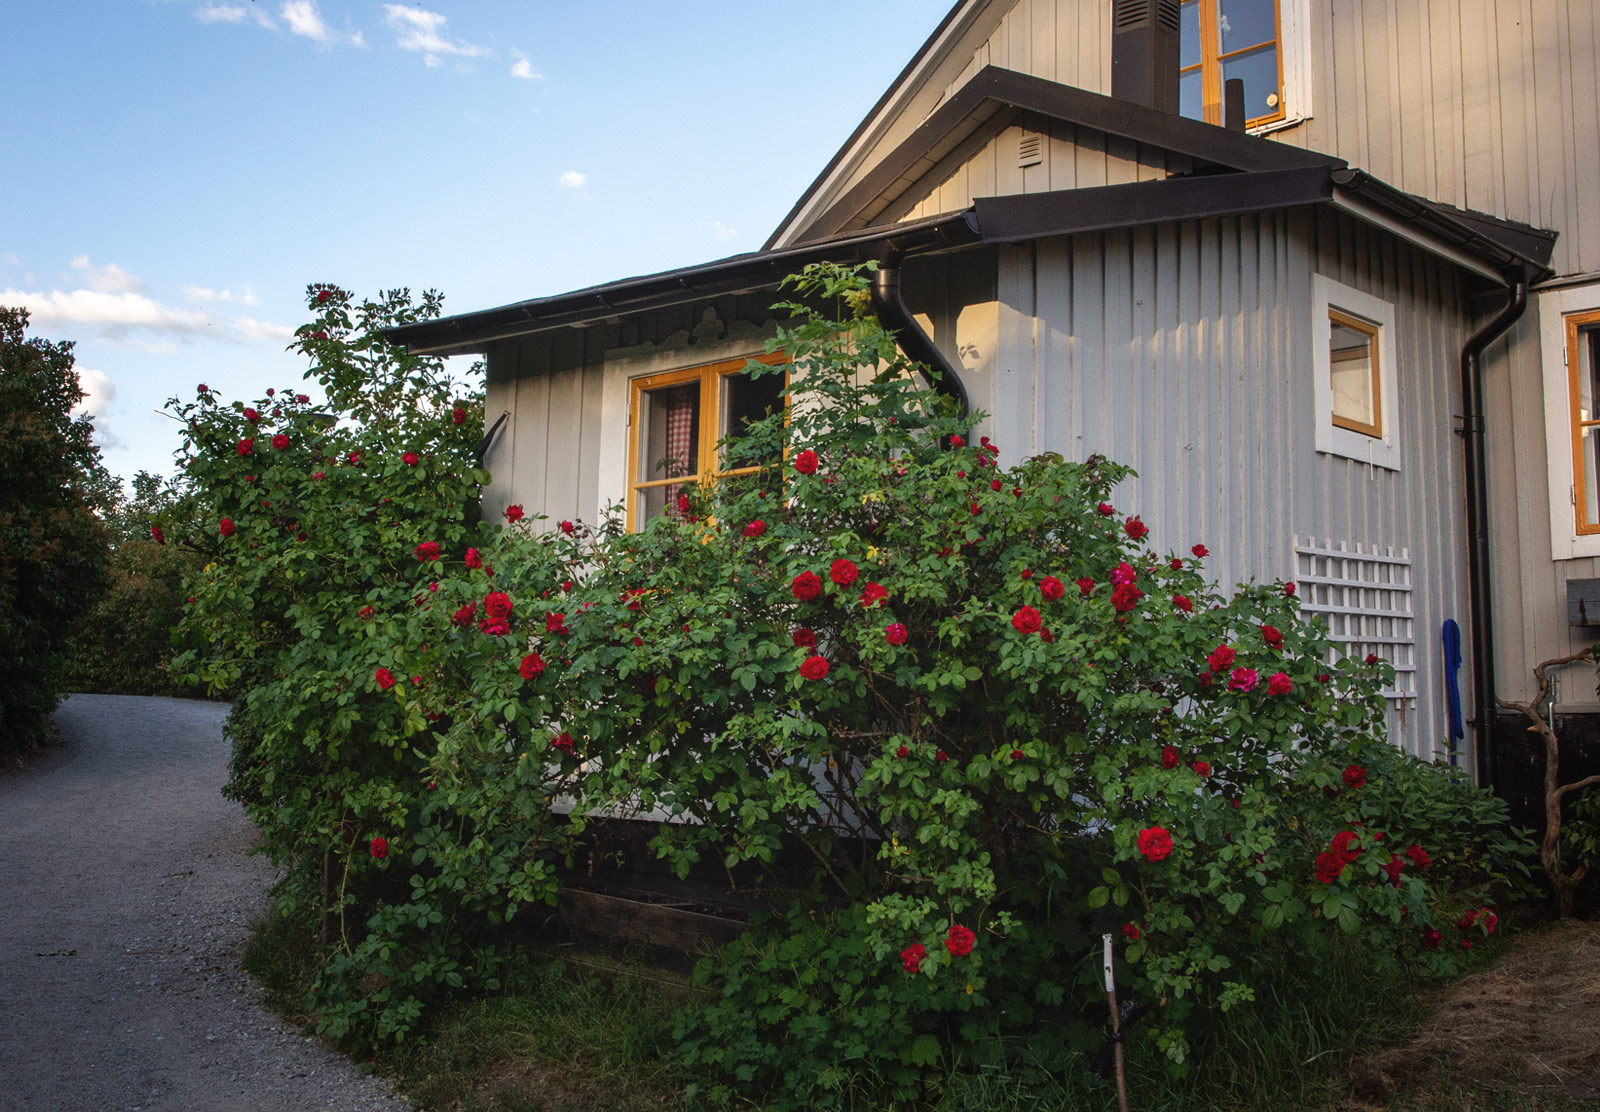 Roses on wooden house